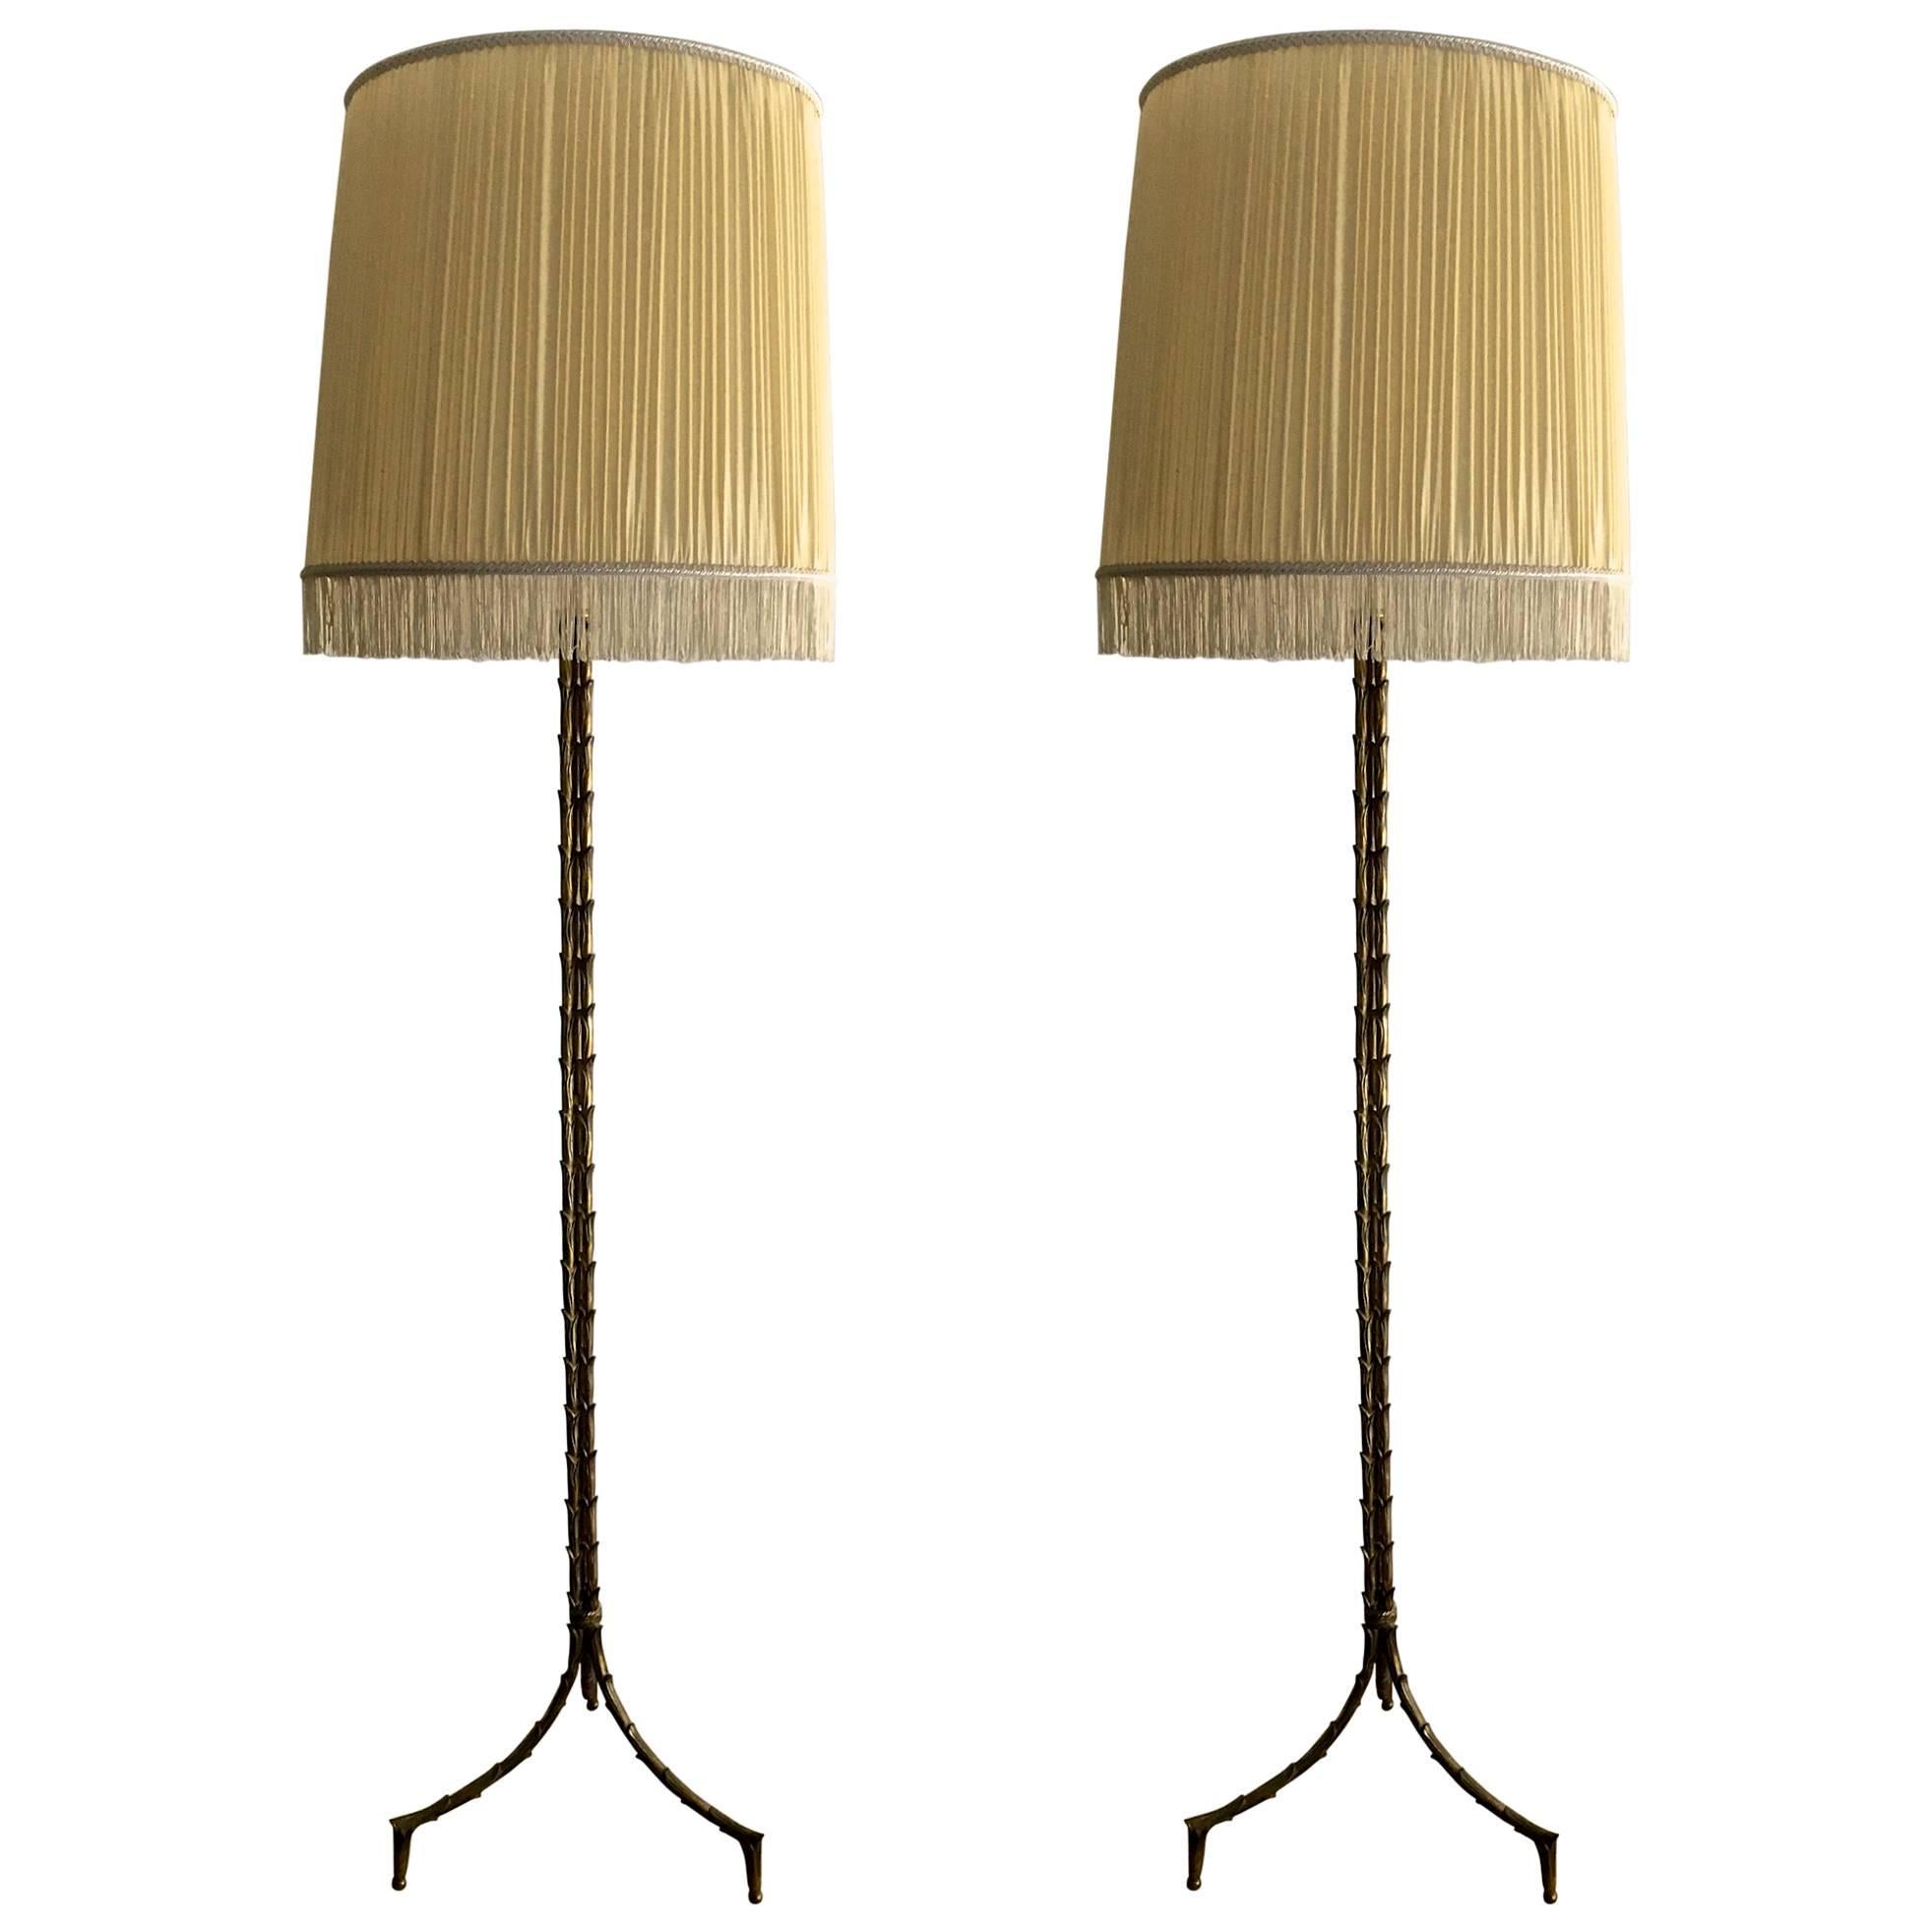 Maison Baguès Rare Pair of Refined Gold Bronze Floor Lamps, Silk Pleated Shades For Sale